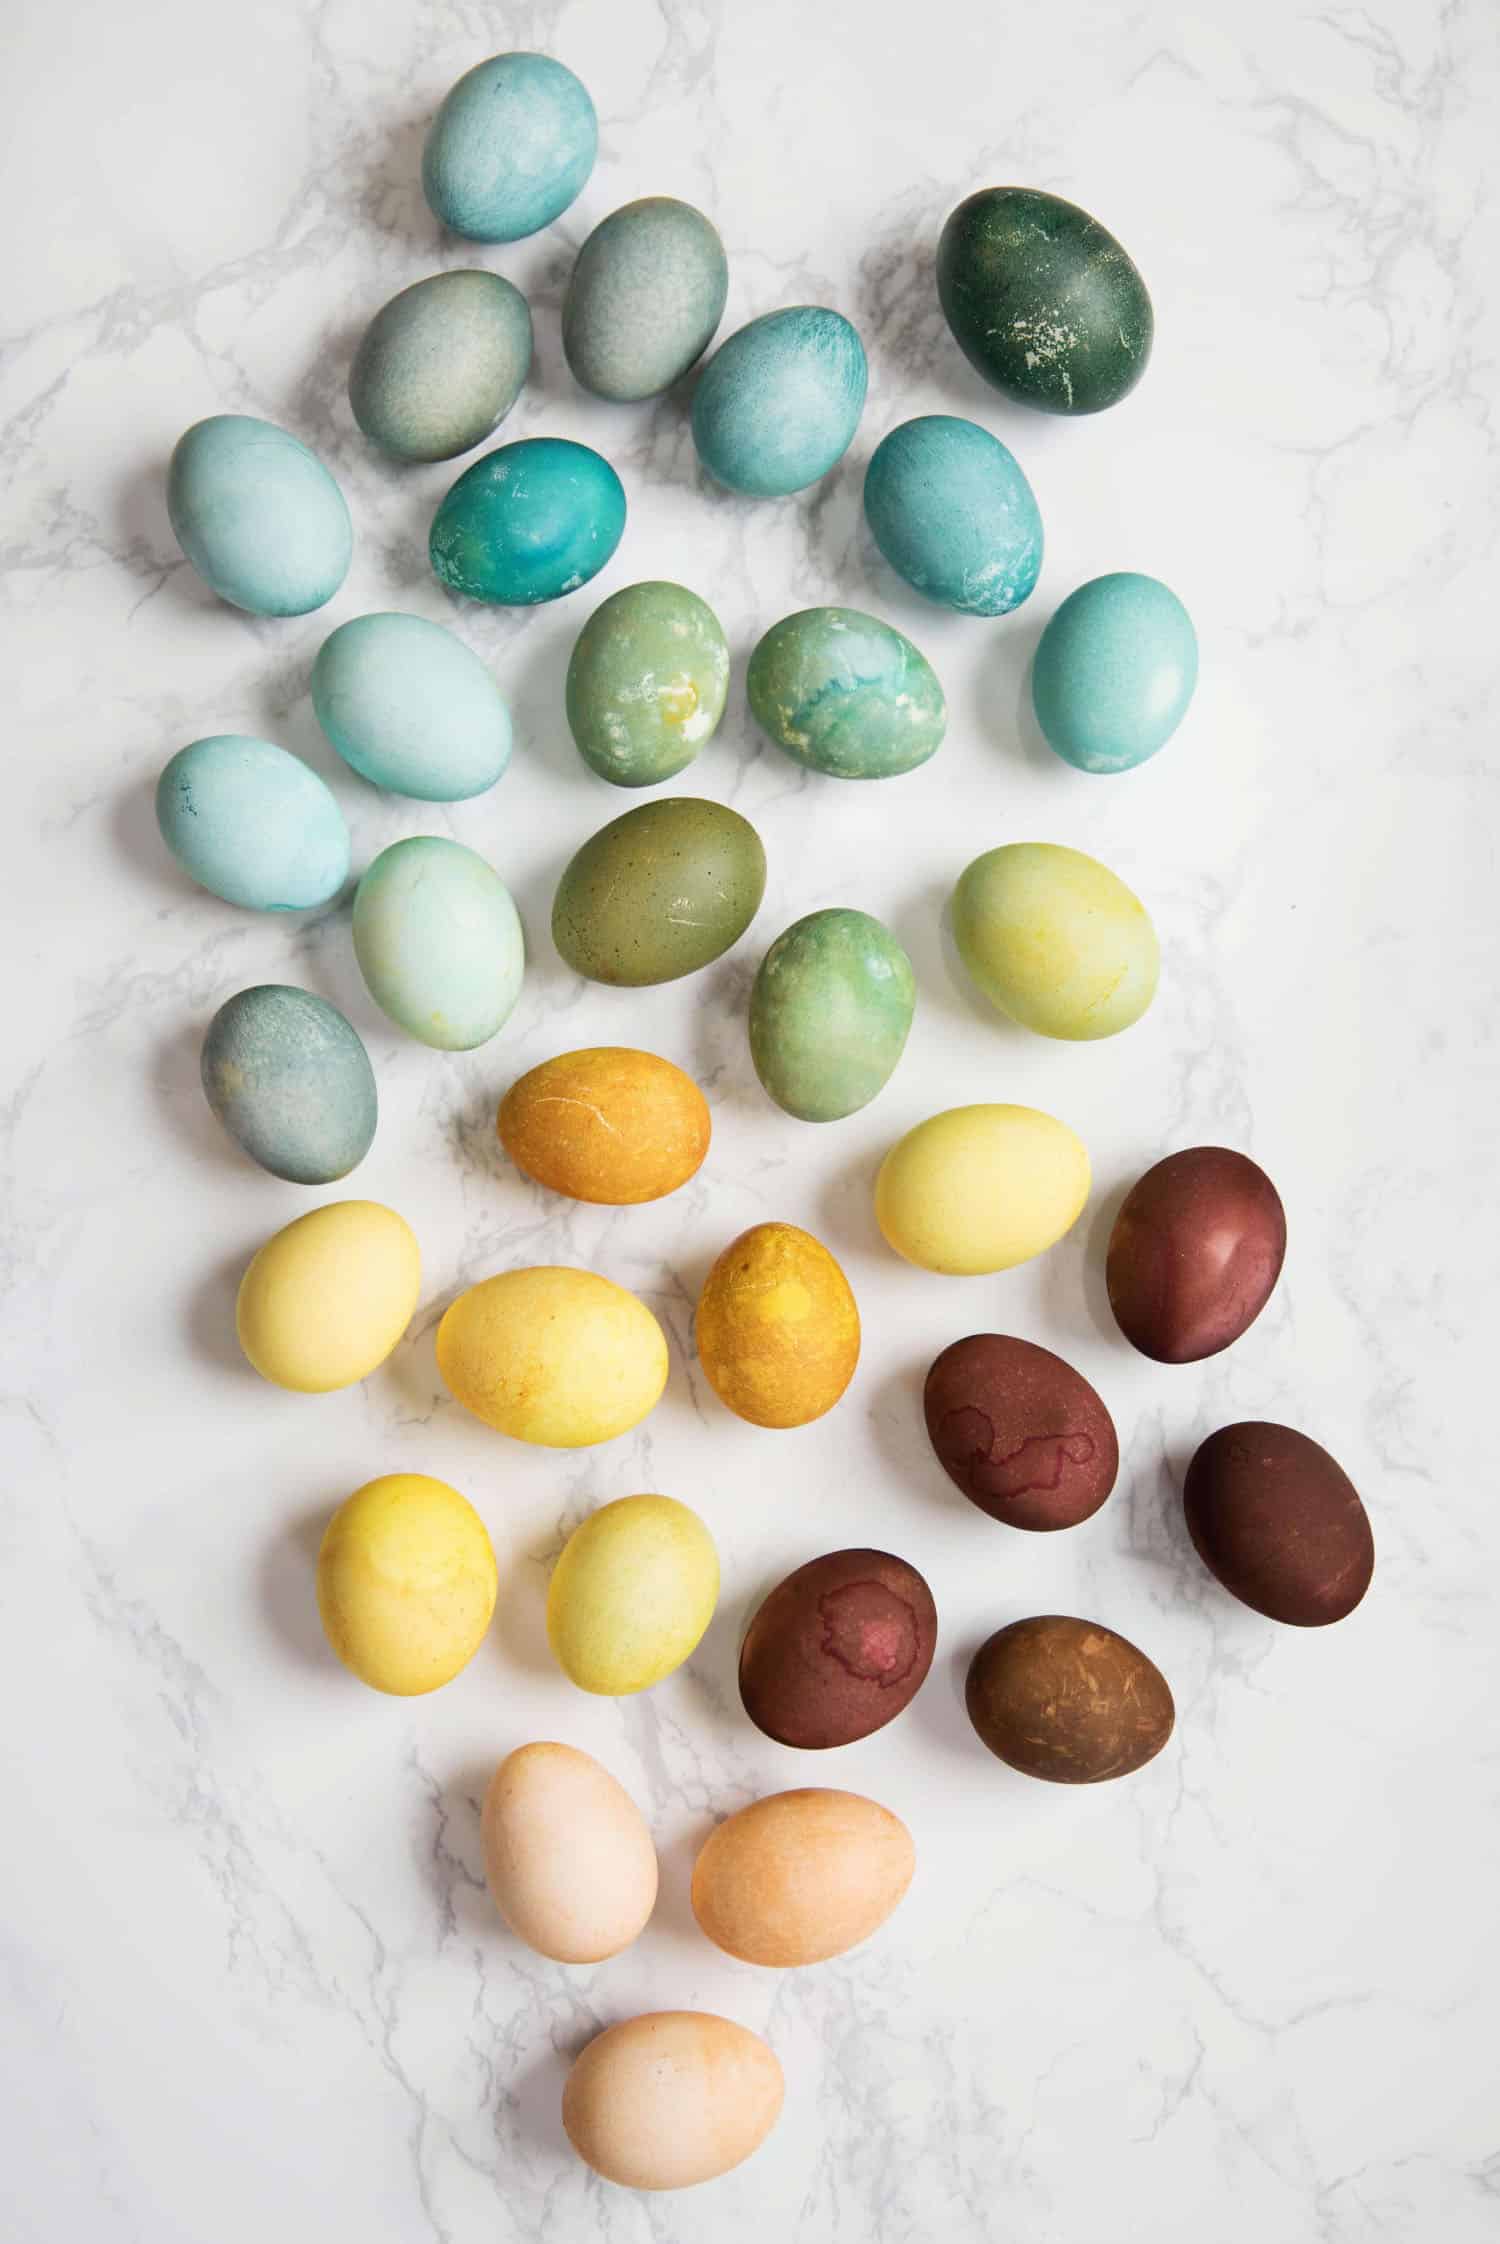 Naturally Dyed Easter Eggs   A Beautiful Mess